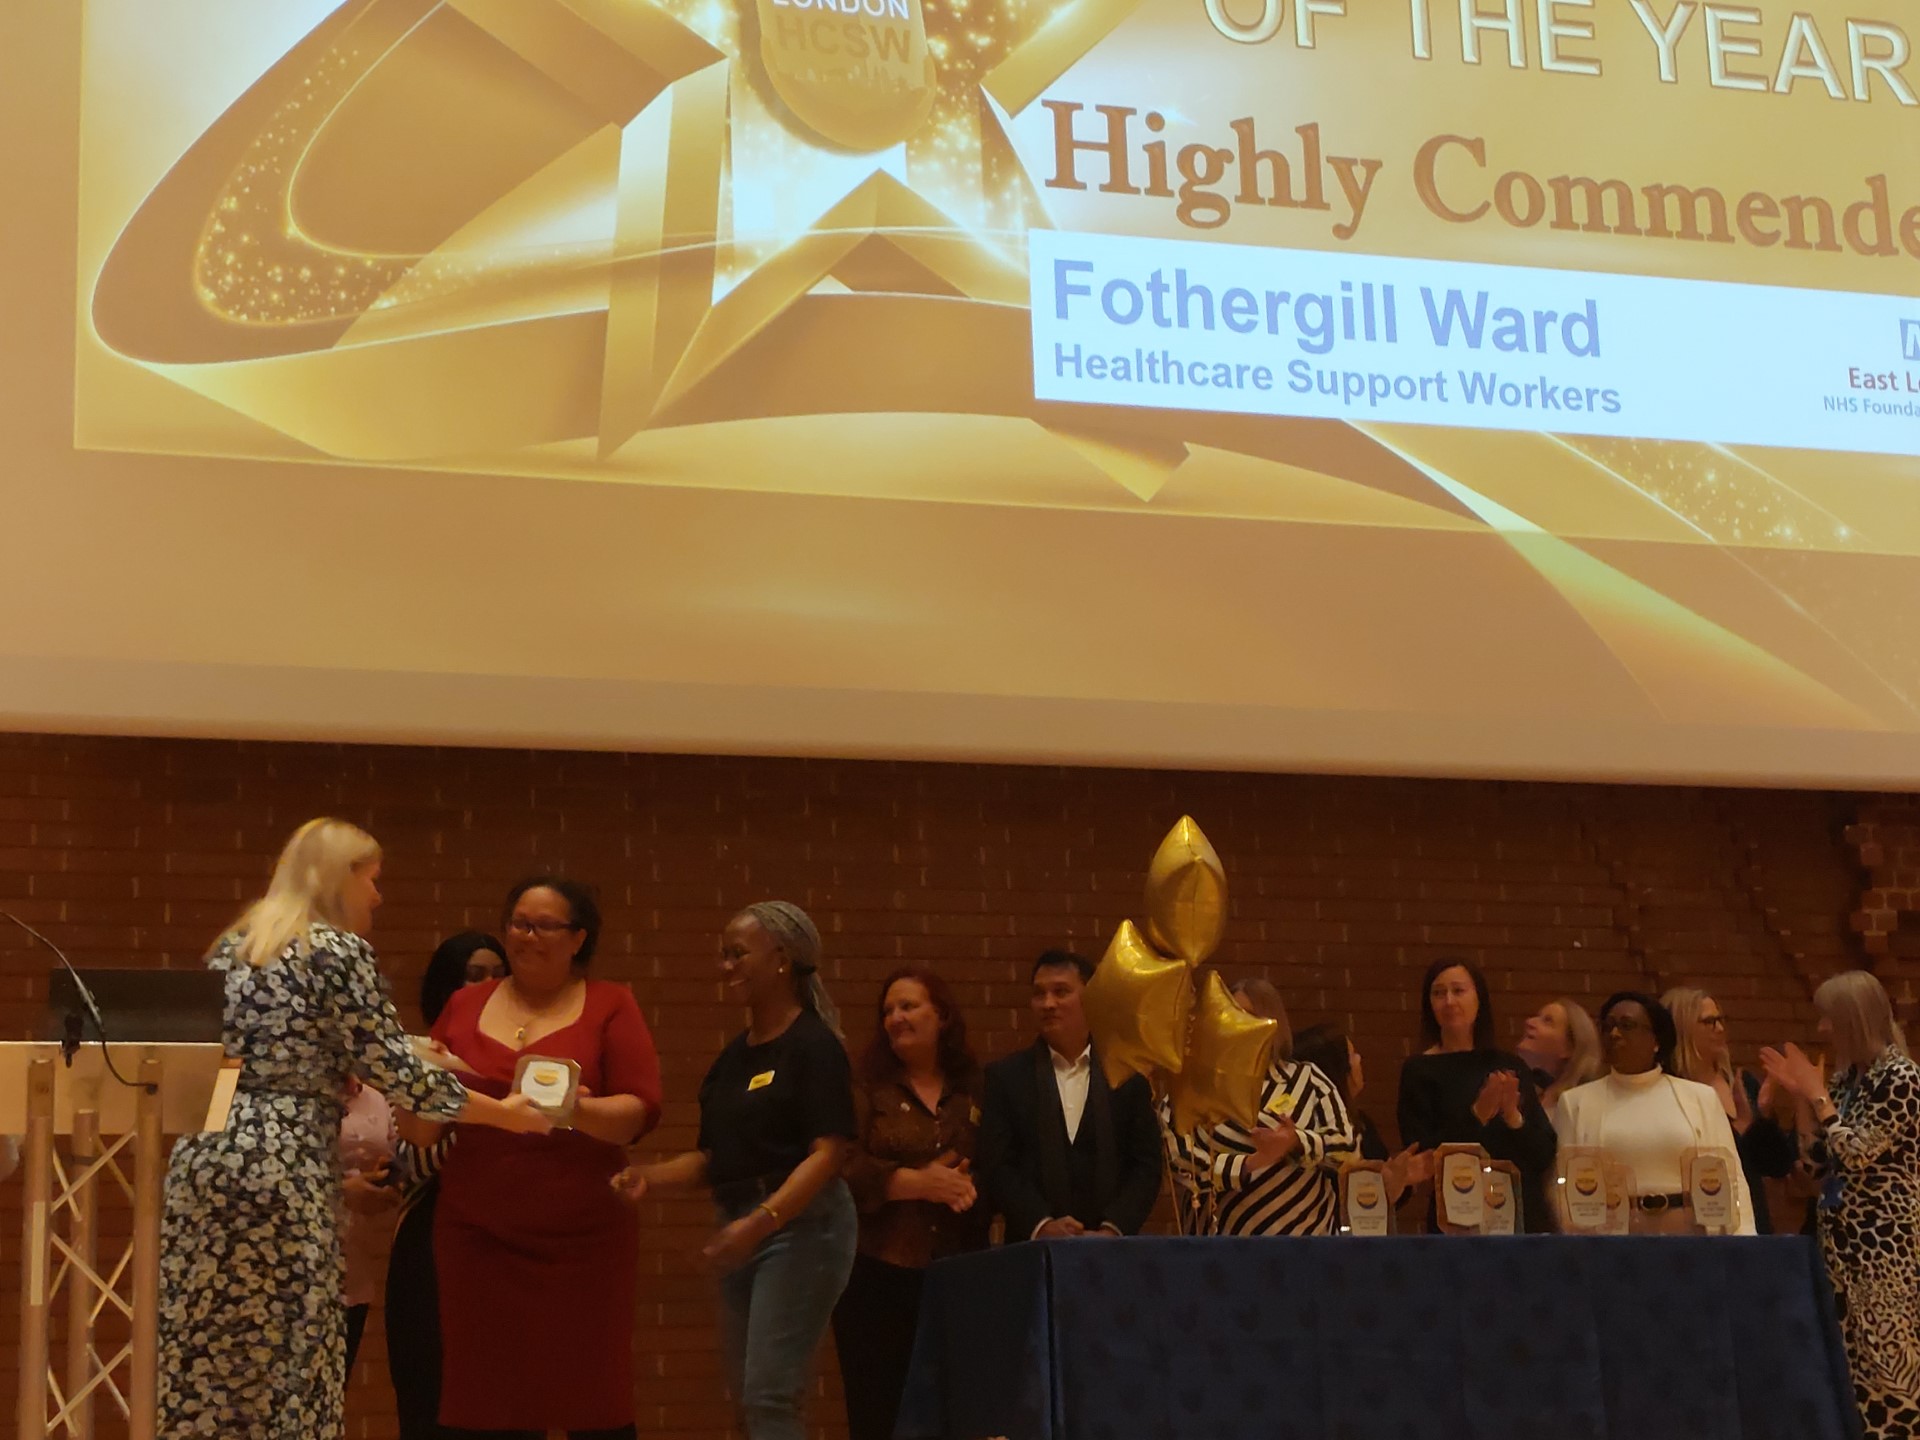 Fothergill Ward accepting the Highly Commended Award.